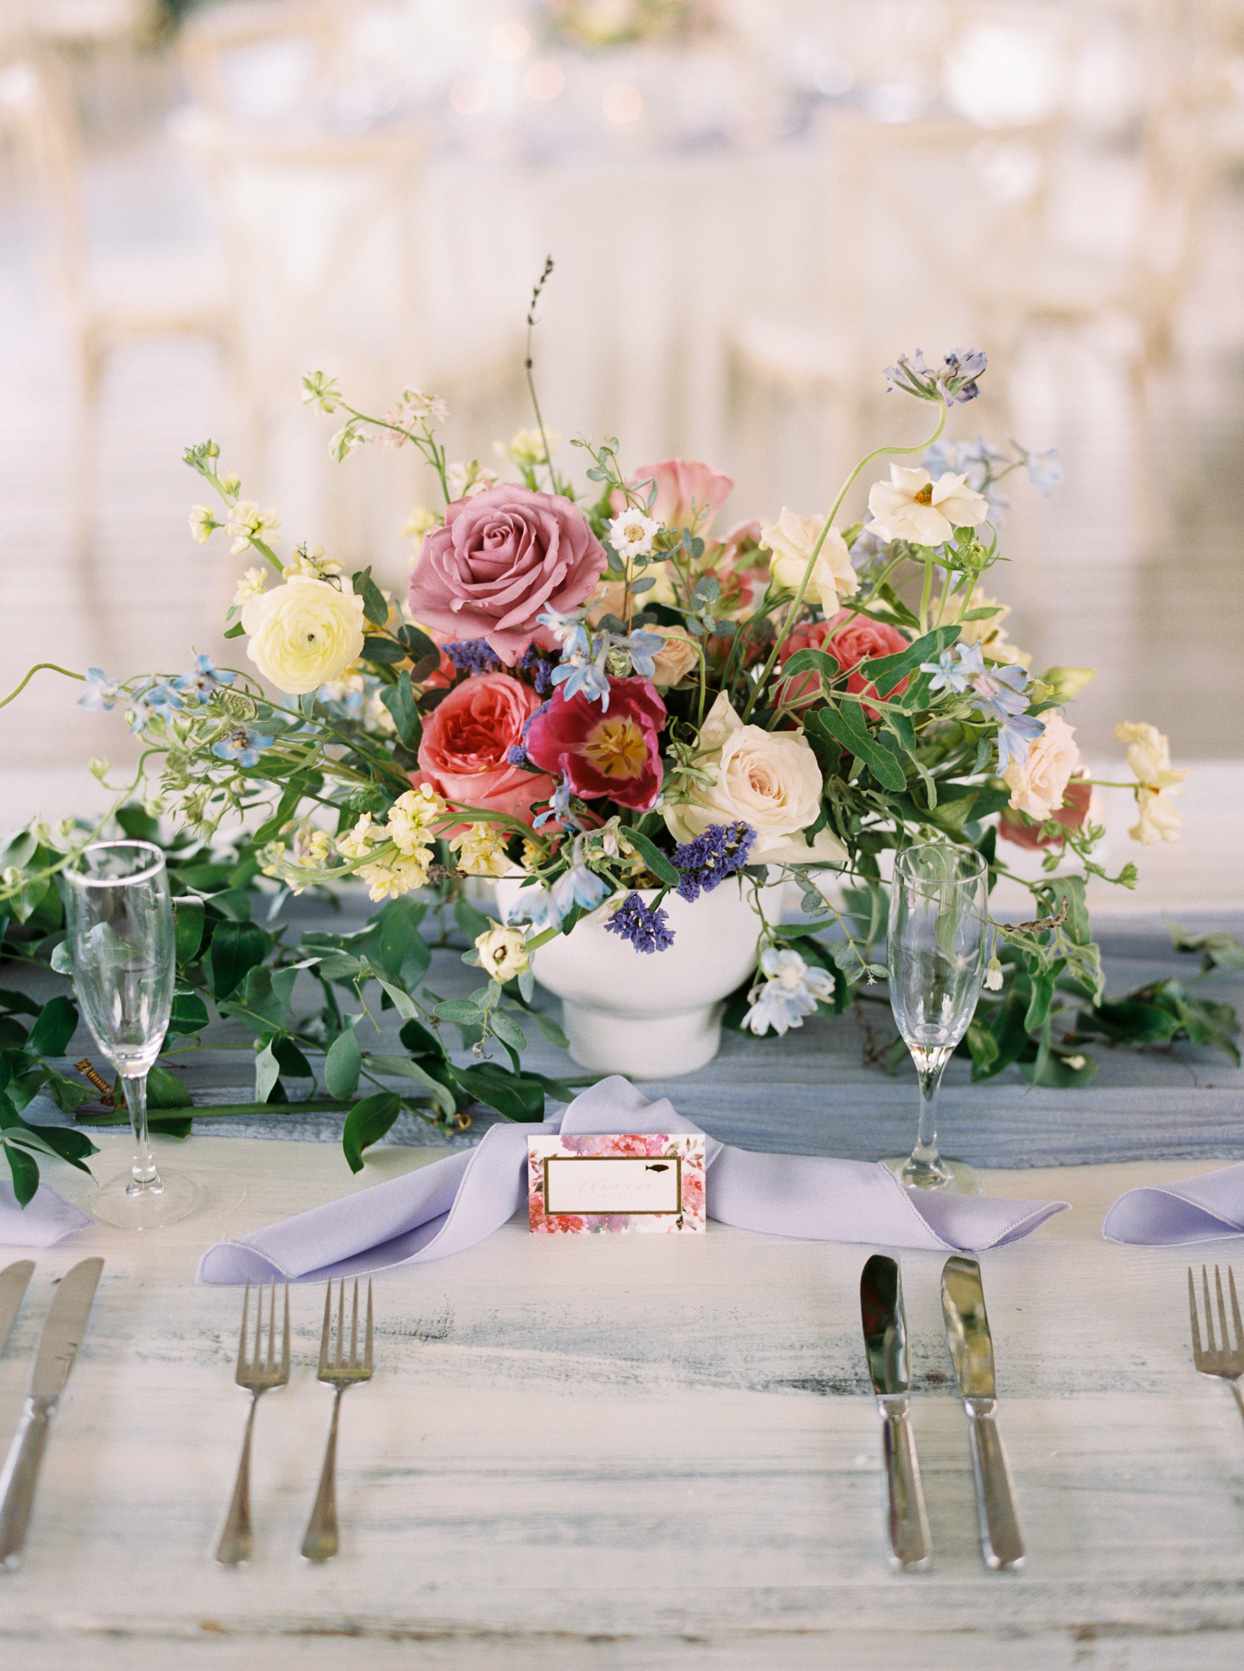 wedding reception tablescape with flowers in low white vessels and lavender napkins